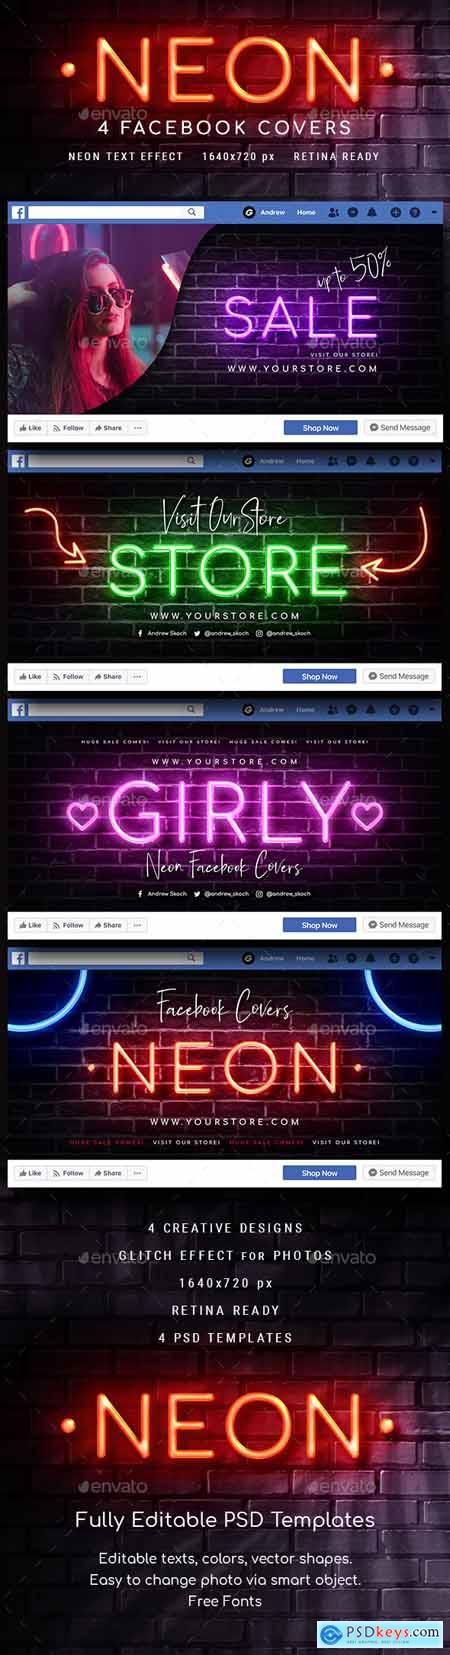 Neon Facebook Covers 26405900